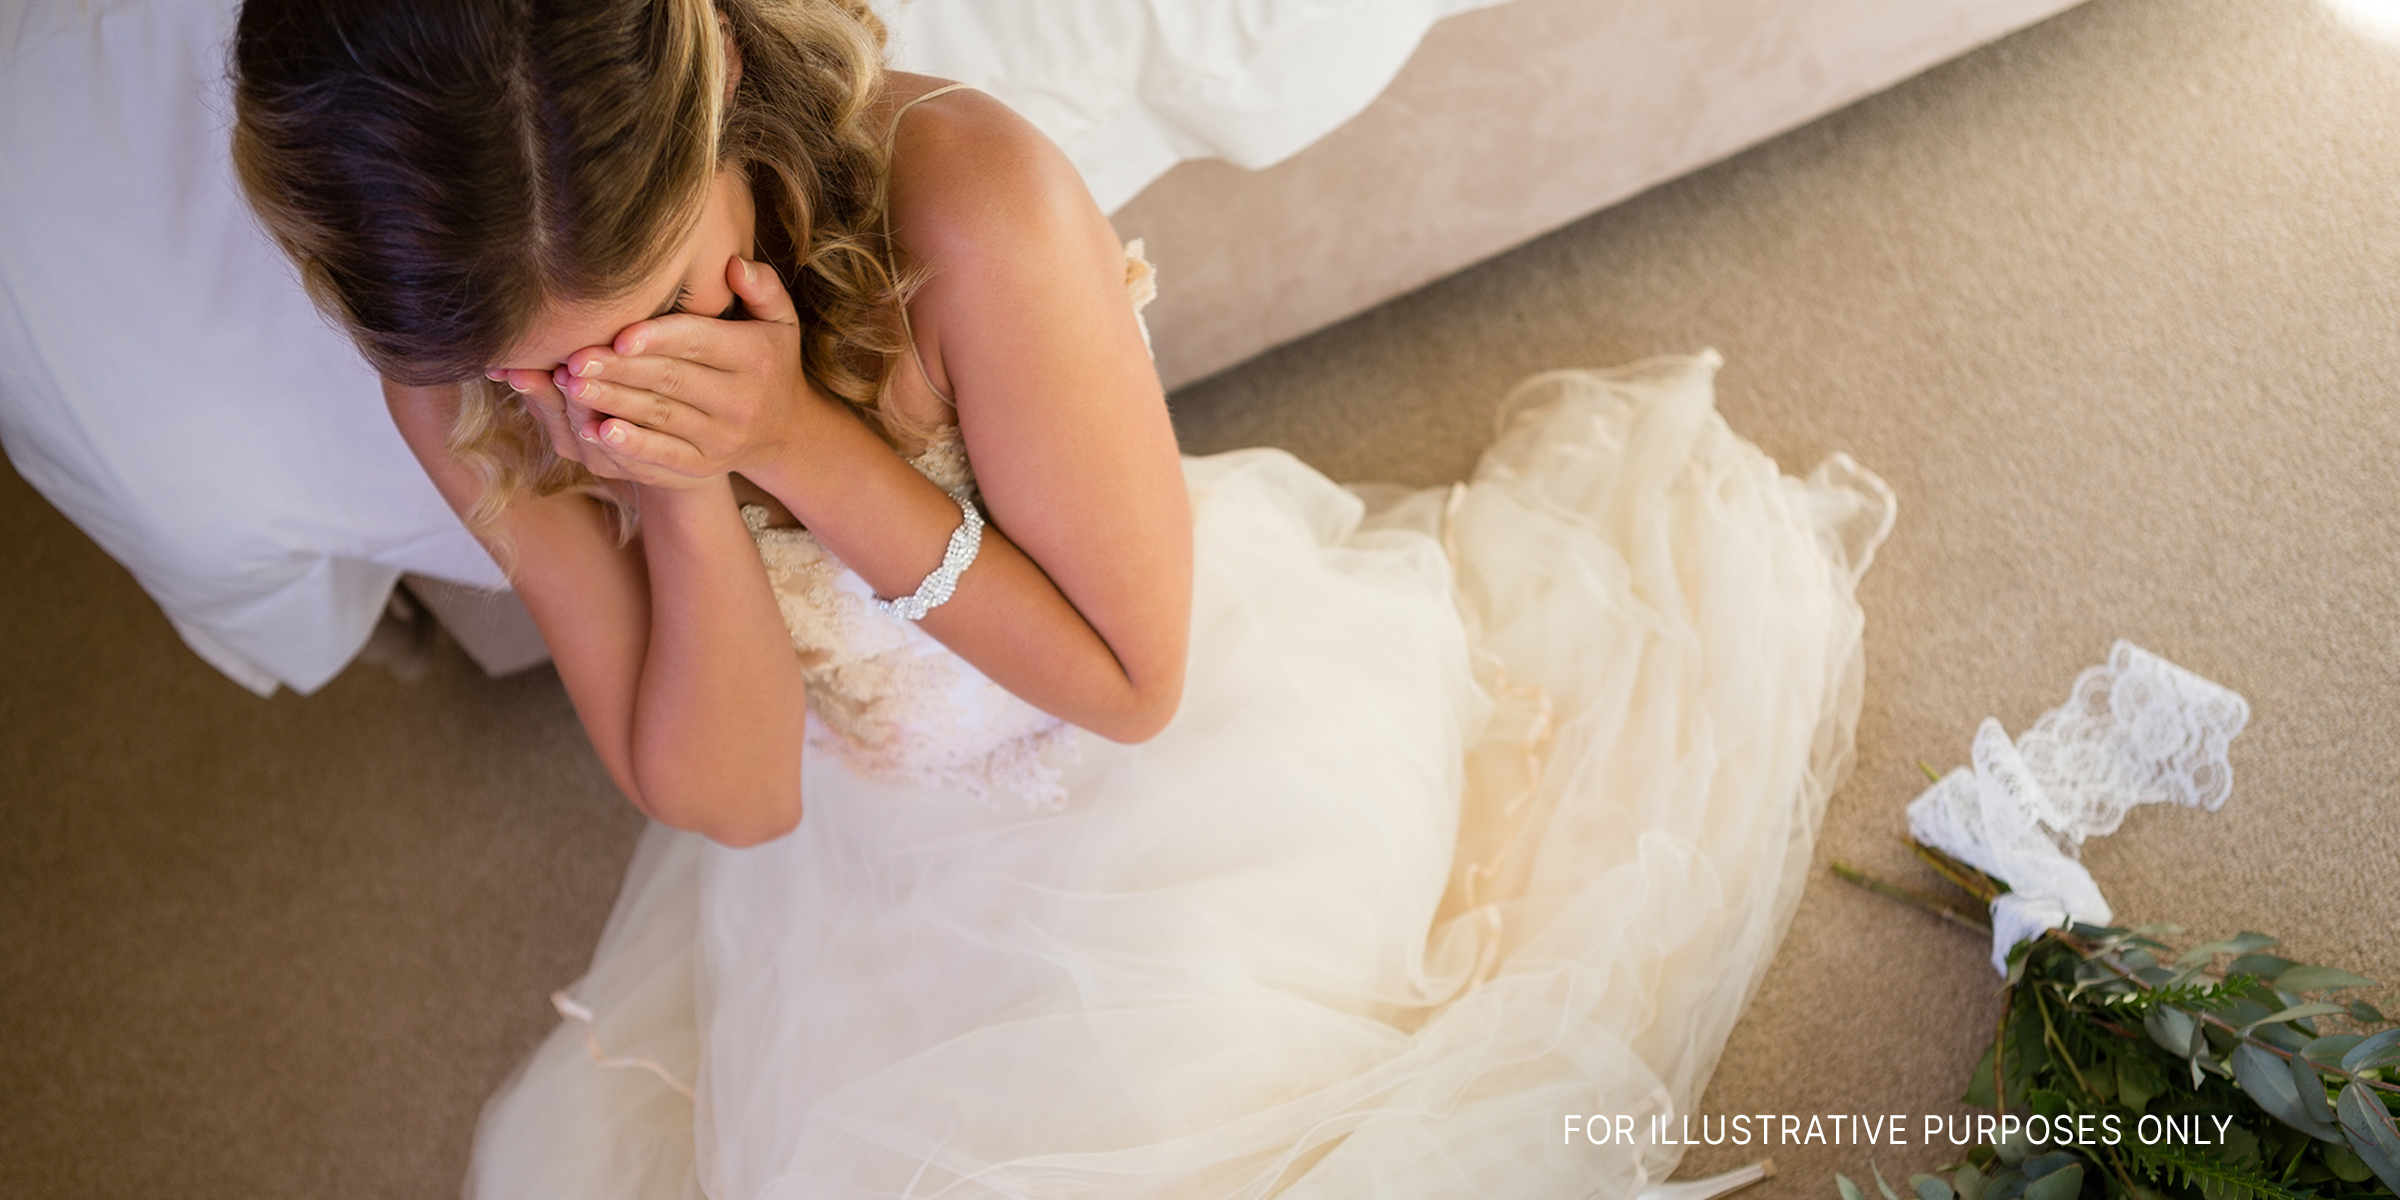 A crying bride | Source: Shutterstock